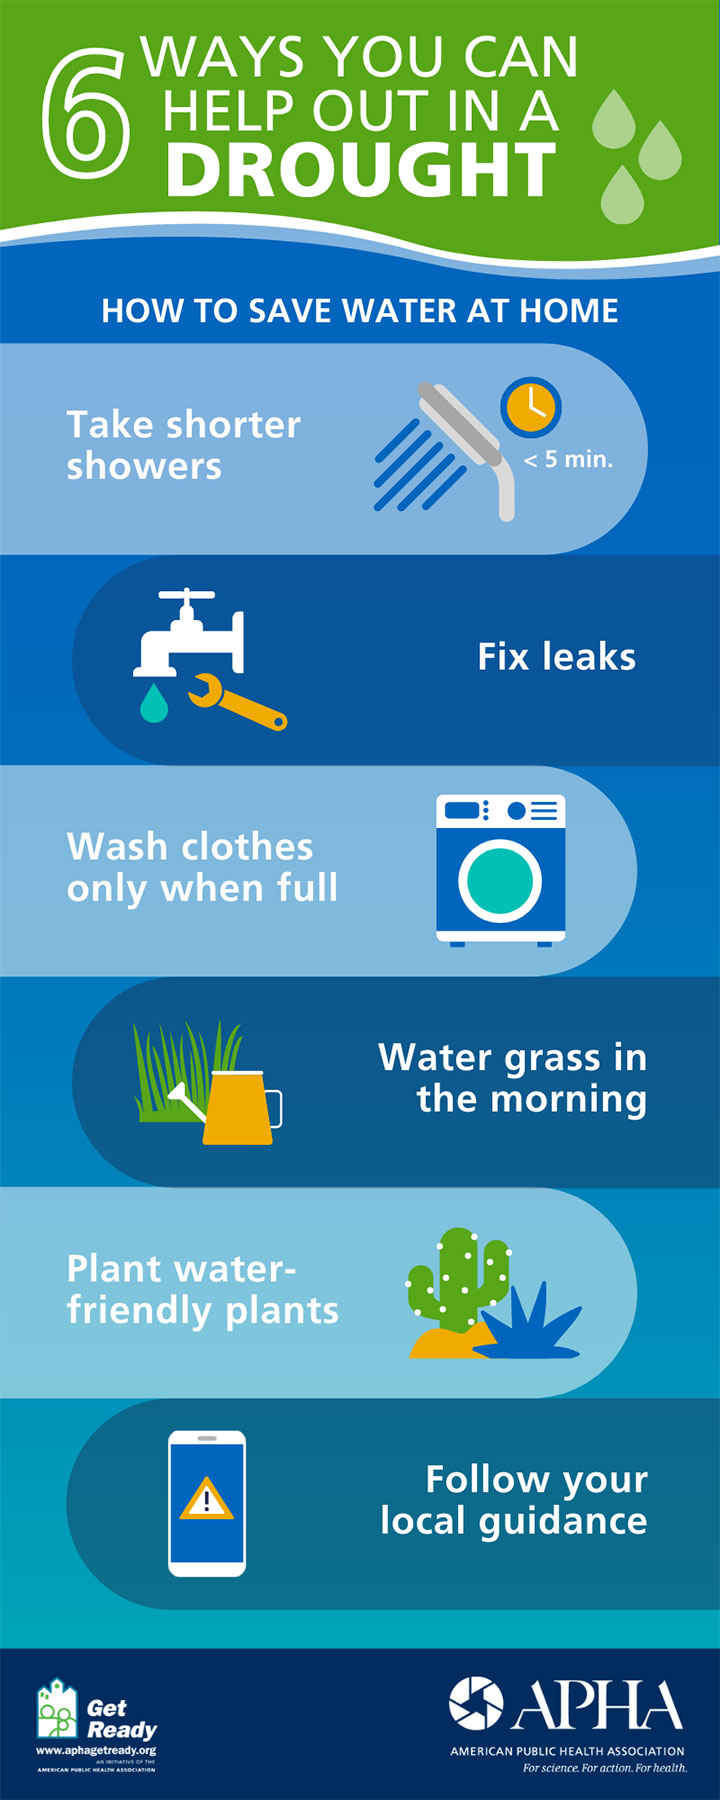 6 Ways You Can Help During a Drought